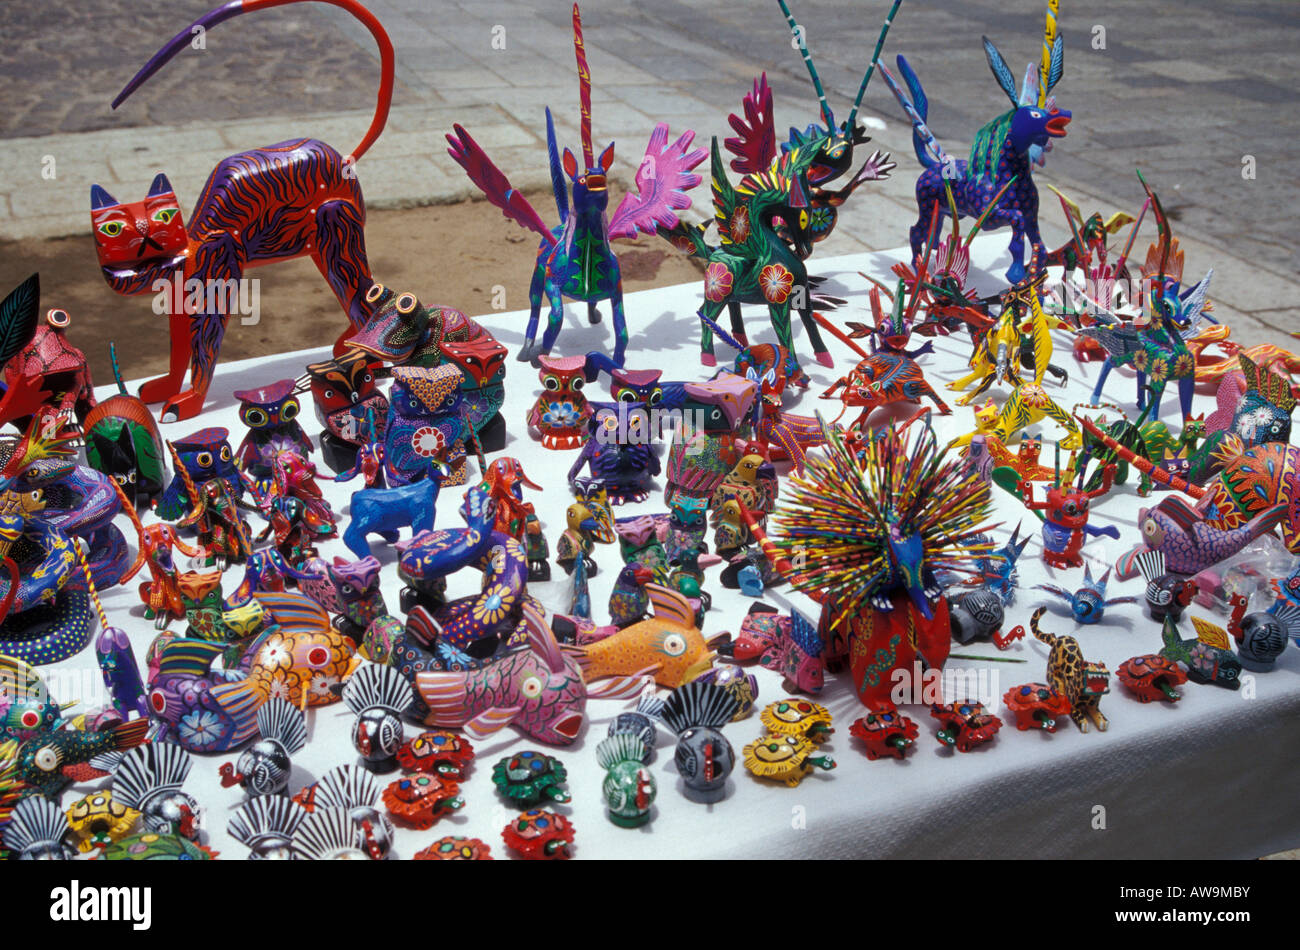 fanciful-carved-wooden-animals-known-as-alebrijes-for-sale-in-the-AW9MBY.jpg